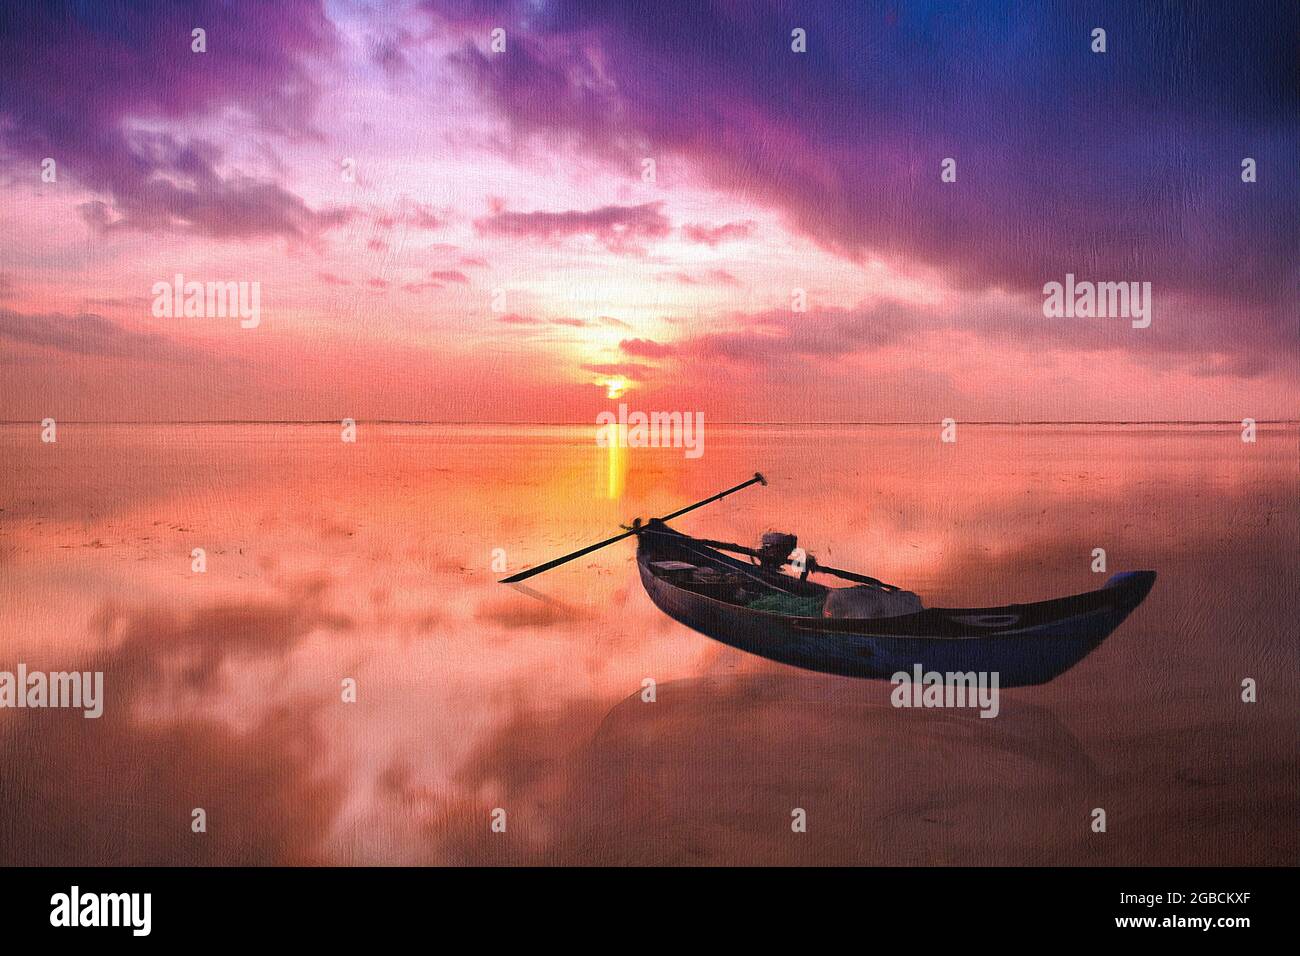 Typical small Asian fishing boat set on a calm sea against a dramatic sunset. Given a painted and textured appearance. Stock Photo